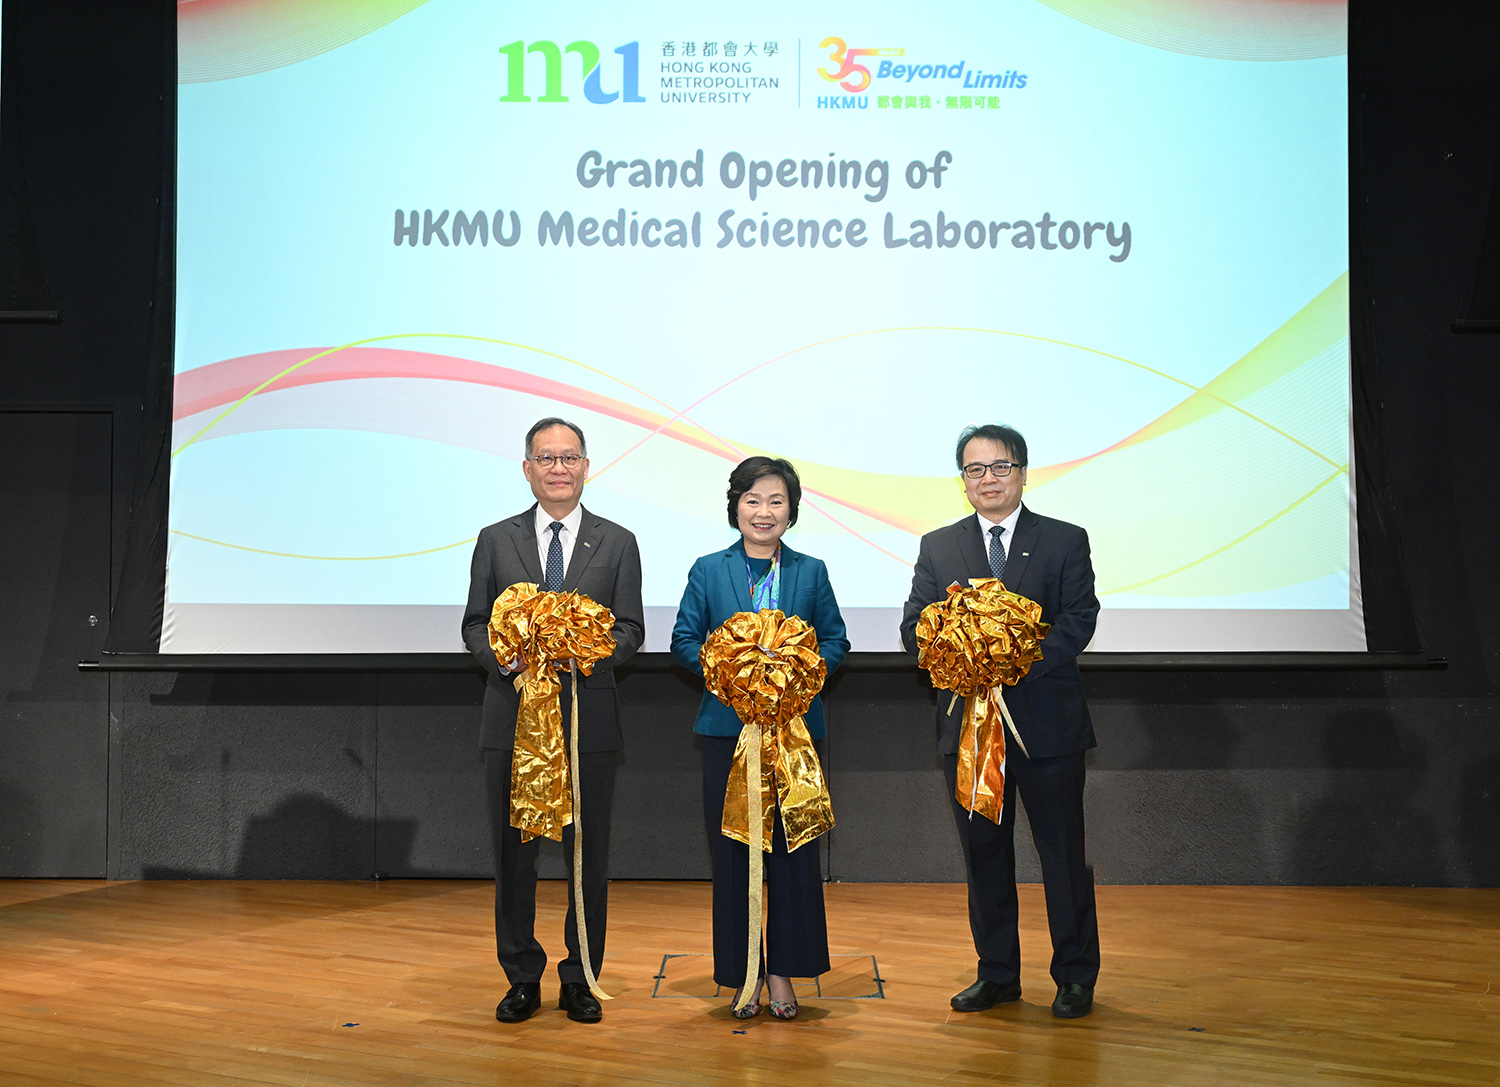 Secretary for Education Dr Choi Yuk-lin (centre), HKMU President Prof. Paul Lam Kwan-sing (left) and HKMU Dean of School of Science and Technology Prof. Philips Wang Fu-lee (right), officiate at the grand opening ceremony of the HKMU Medical Science Laboratory.